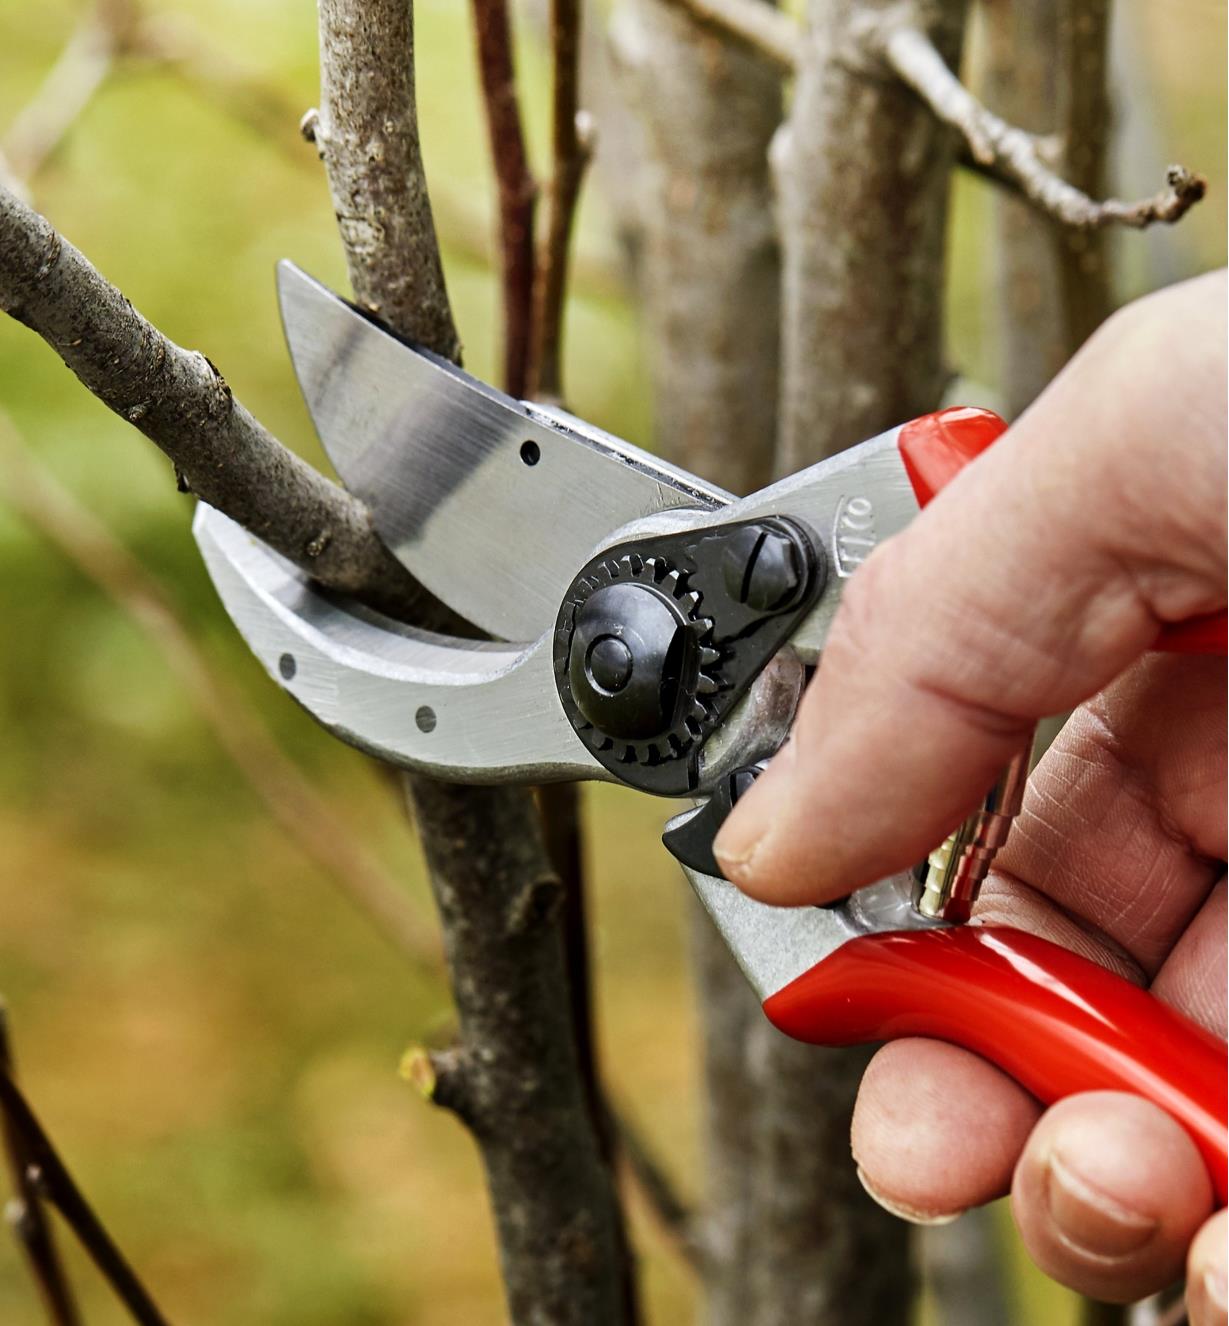 Using a Felco #2 pruner to trim a branch